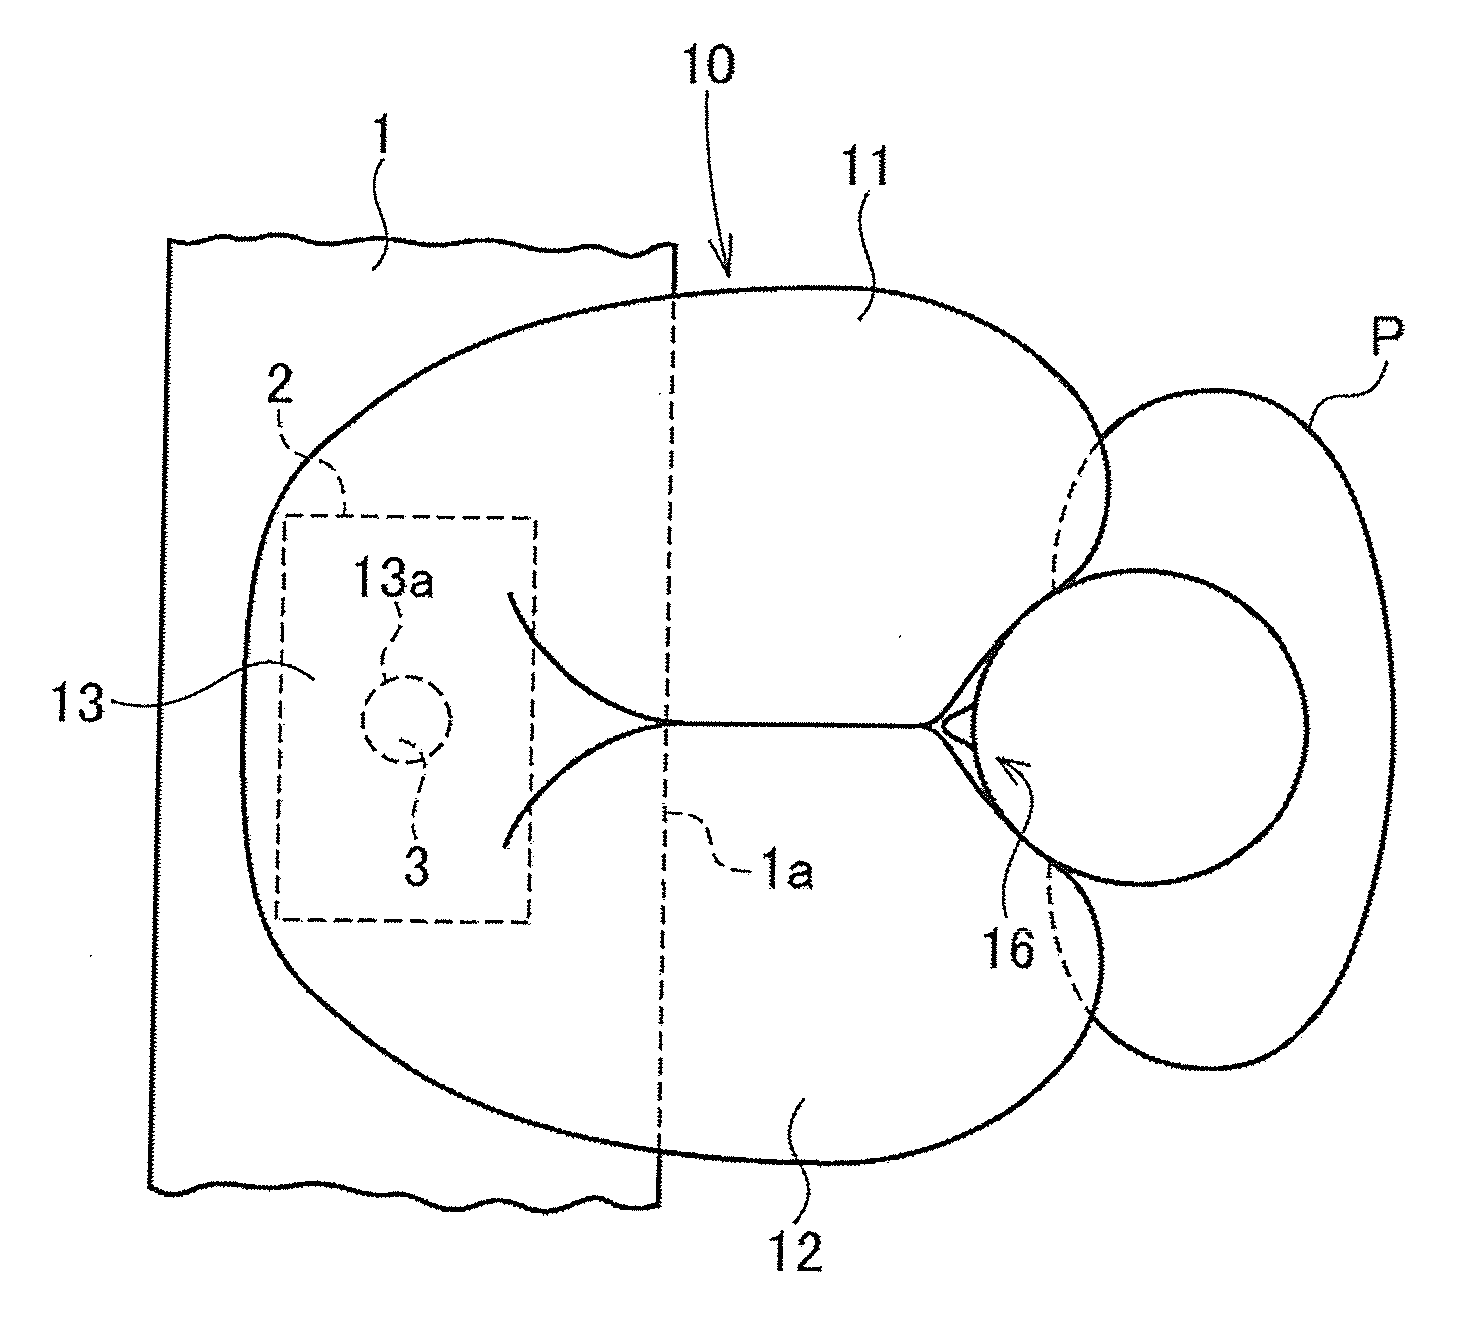 Passenger-side airbag folded body and passenger-side airbag apparatus